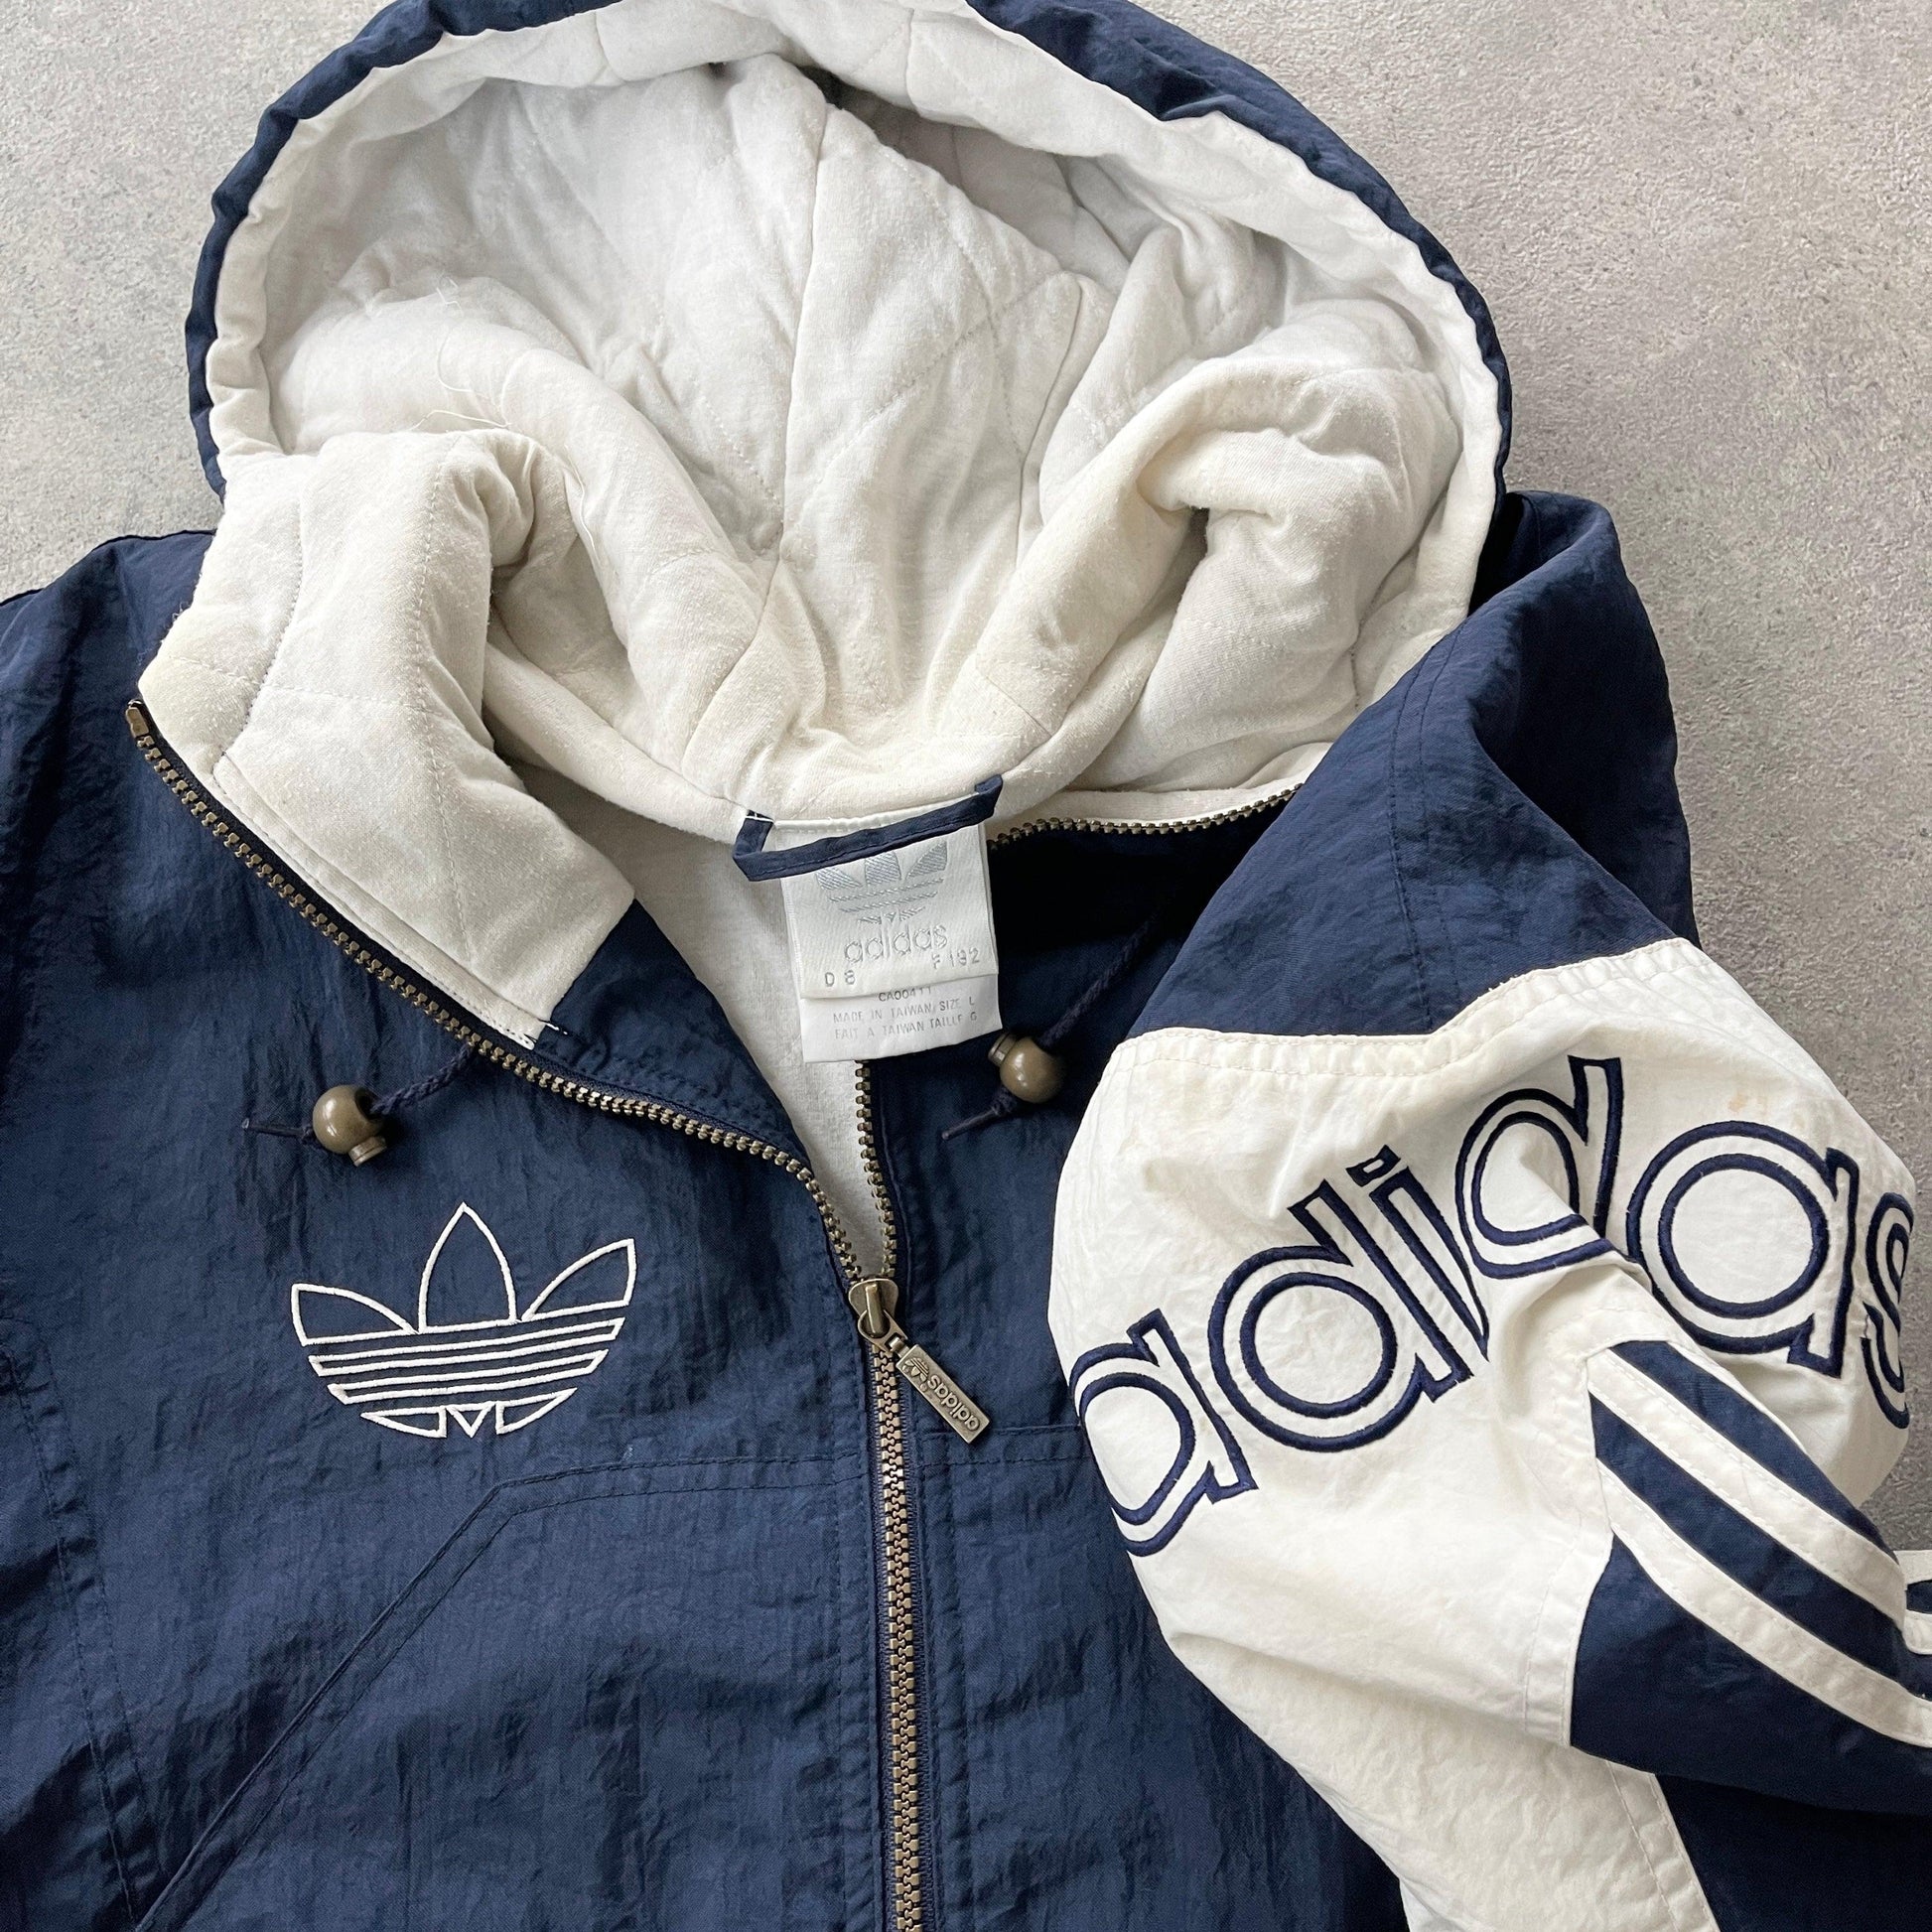 Adidas 1990s spellout padded bomber jacket (L) - Known Source